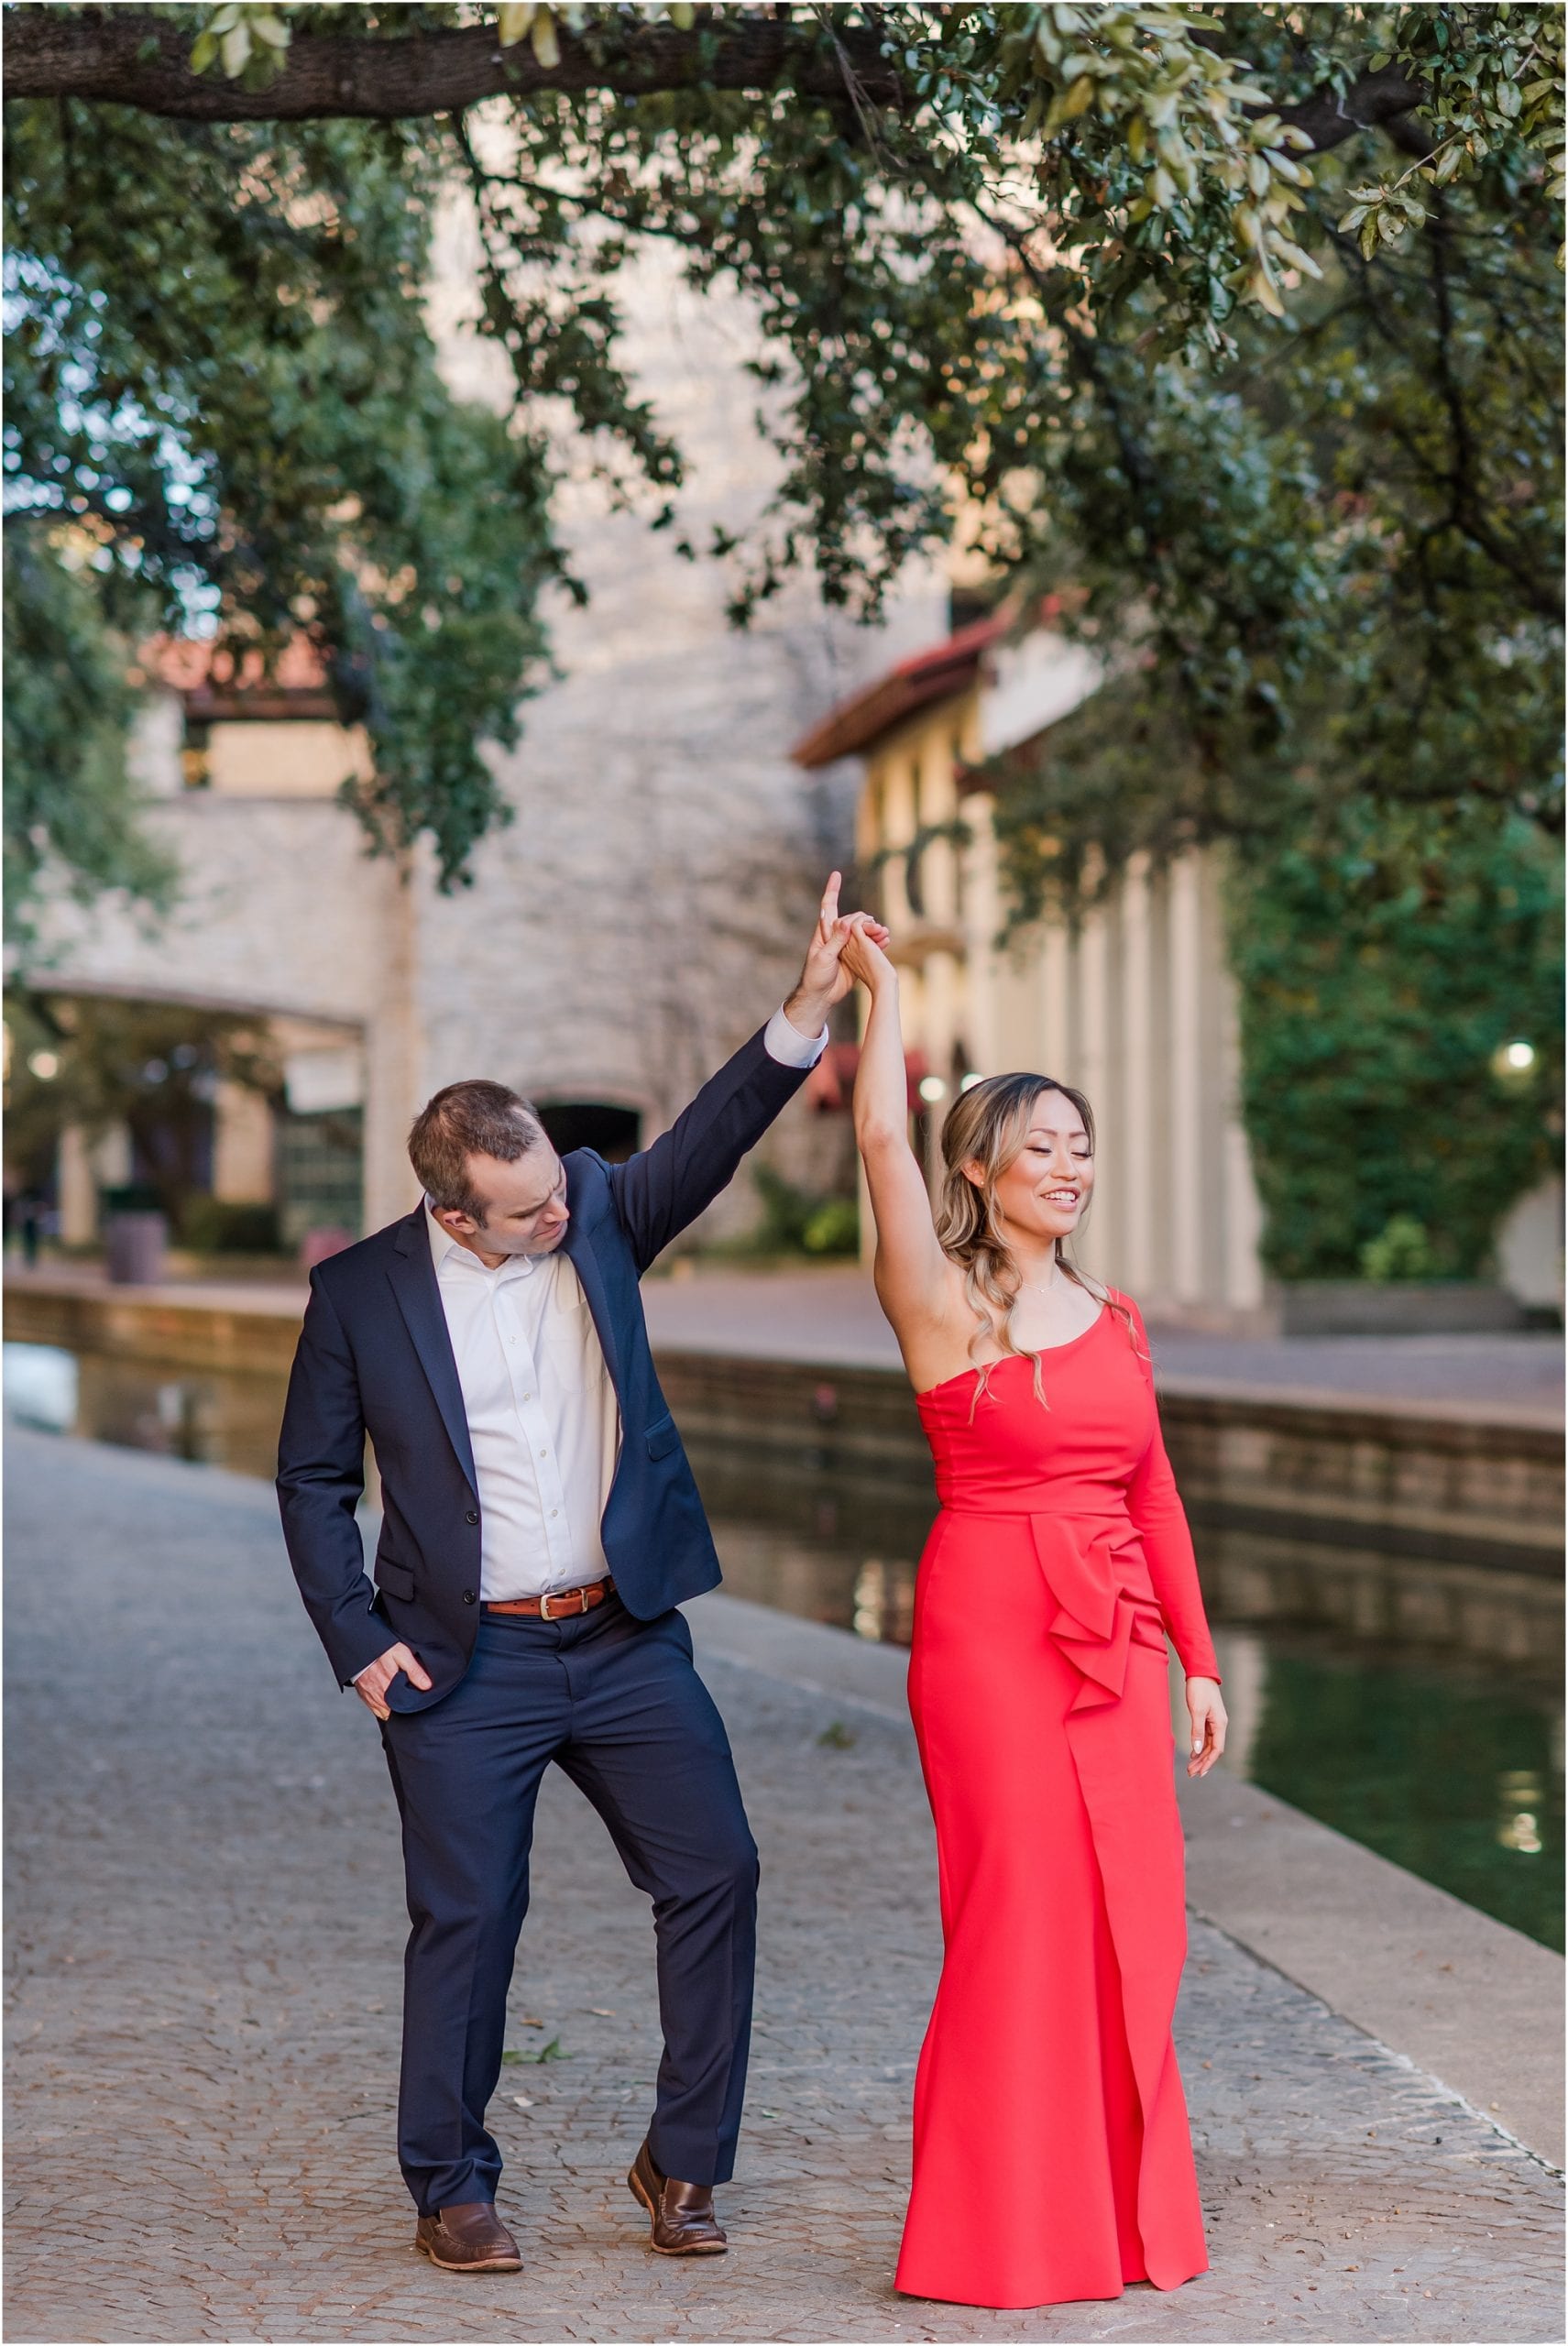 MaggShots Photography, DFW engagement Photographer, Las Colinas Canals engagement Photographer, Las Colinas Canals, Las Colinas engagements, Las Colinas Photographer, Dallas engagement Photographer, doctors, twirl me, twirling